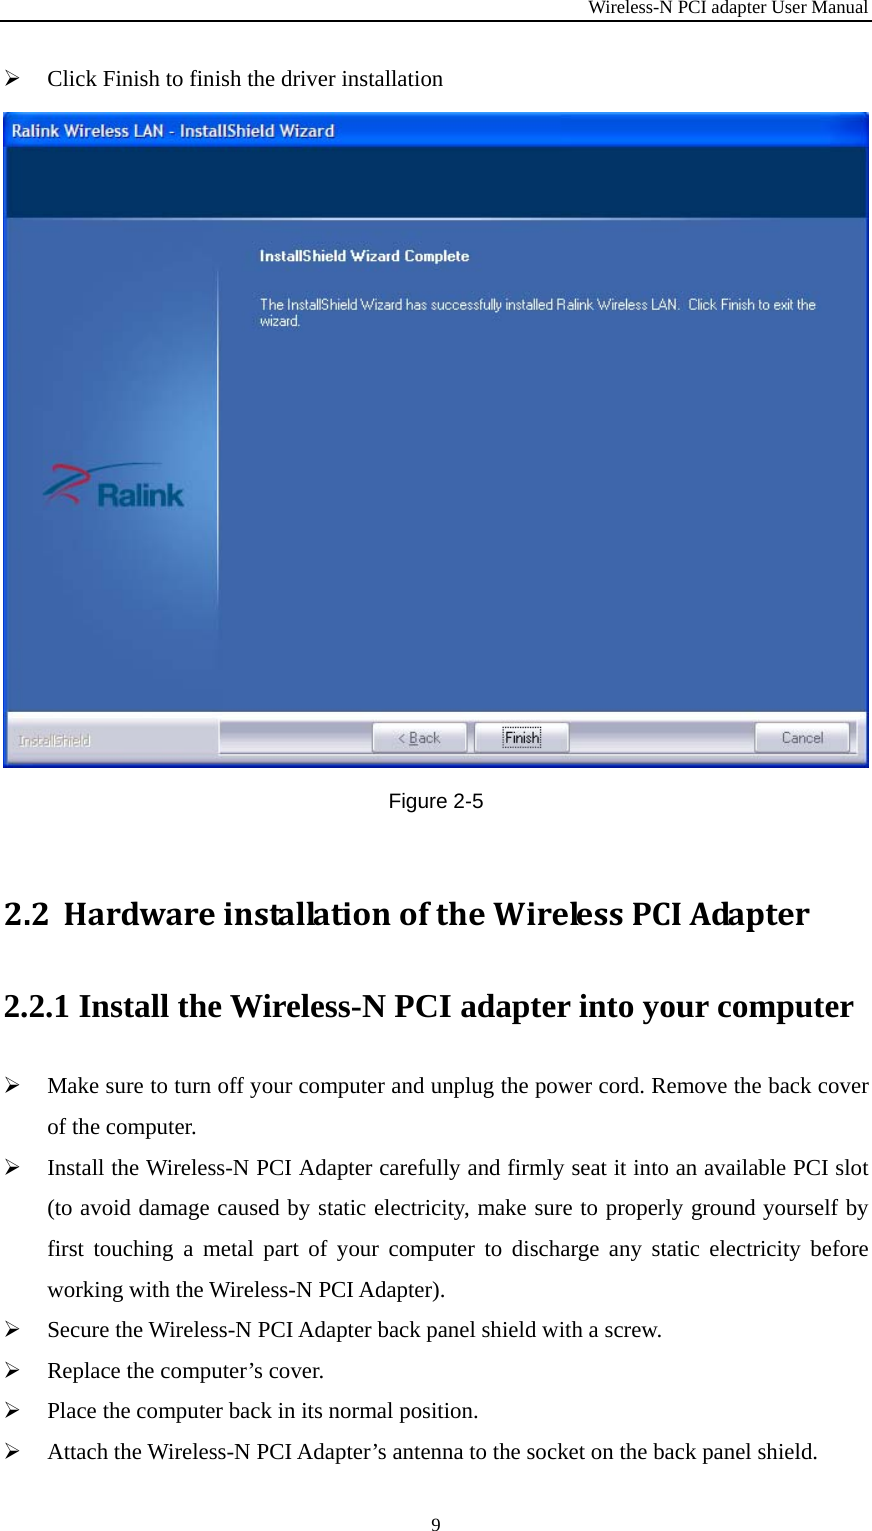 Wireless-N PCI adapter User Manual 9  Click Finish to finish the driver installation  Figure 2-5 2.2 HardwareinstallationoftheWirelessPCIAdapter2.2.1 Install the Wireless-N PCI adapter into your computer  Make sure to turn off your computer and unplug the power cord. Remove the back cover of the computer.  Install the Wireless-N PCI Adapter carefully and firmly seat it into an available PCI slot (to avoid damage caused by static electricity, make sure to properly ground yourself by first touching a metal part of your computer to discharge any static electricity before working with the Wireless-N PCI Adapter).  Secure the Wireless-N PCI Adapter back panel shield with a screw.  Replace the computer’s cover.  Place the computer back in its normal position.  Attach the Wireless-N PCI Adapter’s antenna to the socket on the back panel shield. 